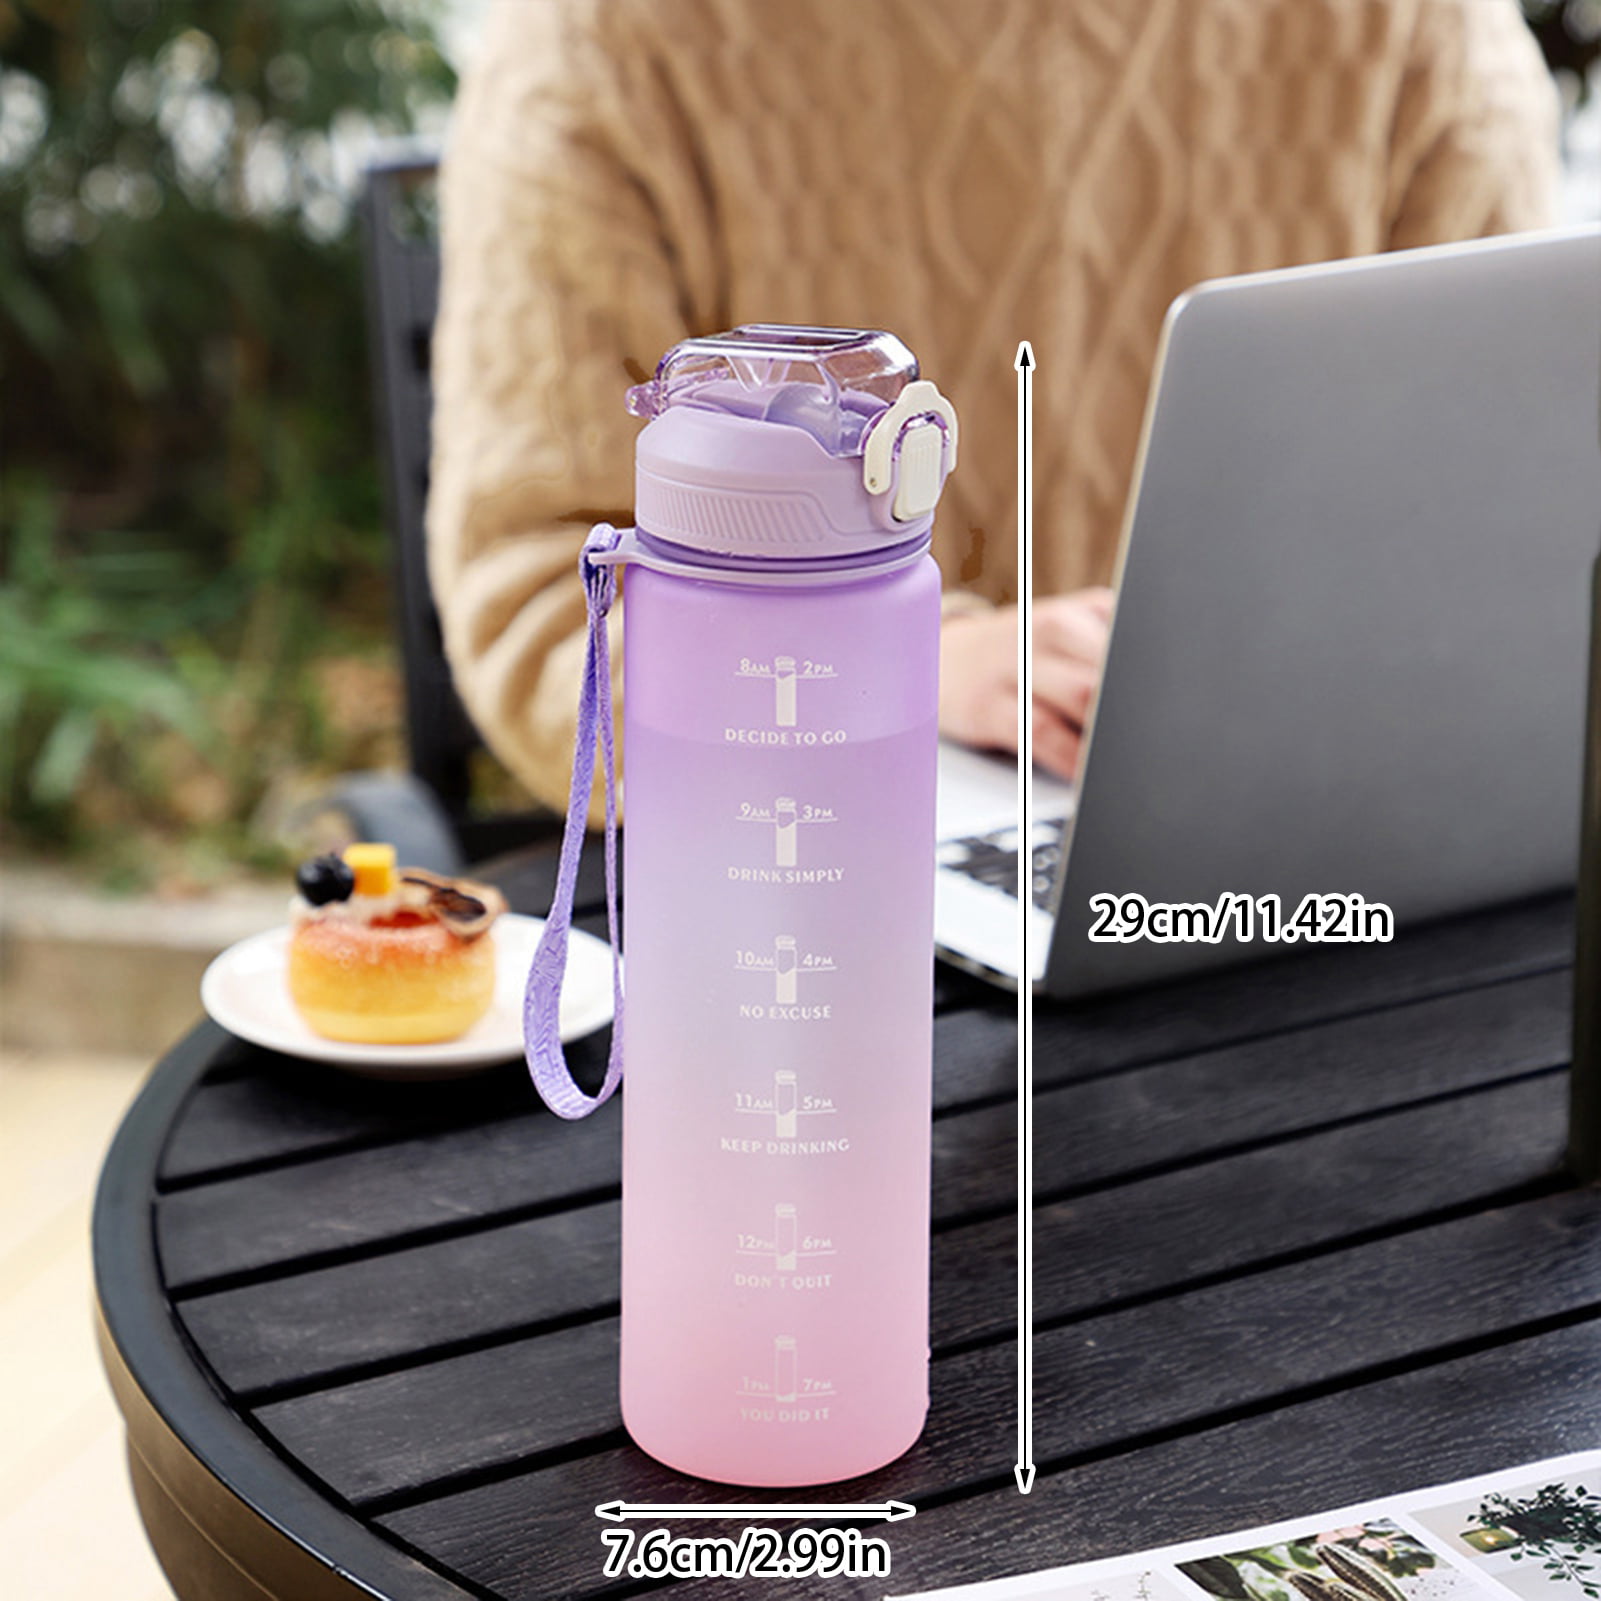 IRON °FLASK Kids Water Bottle - The Child Therapy List  Where parents can  find the right child therapist, counselor or mental health professional